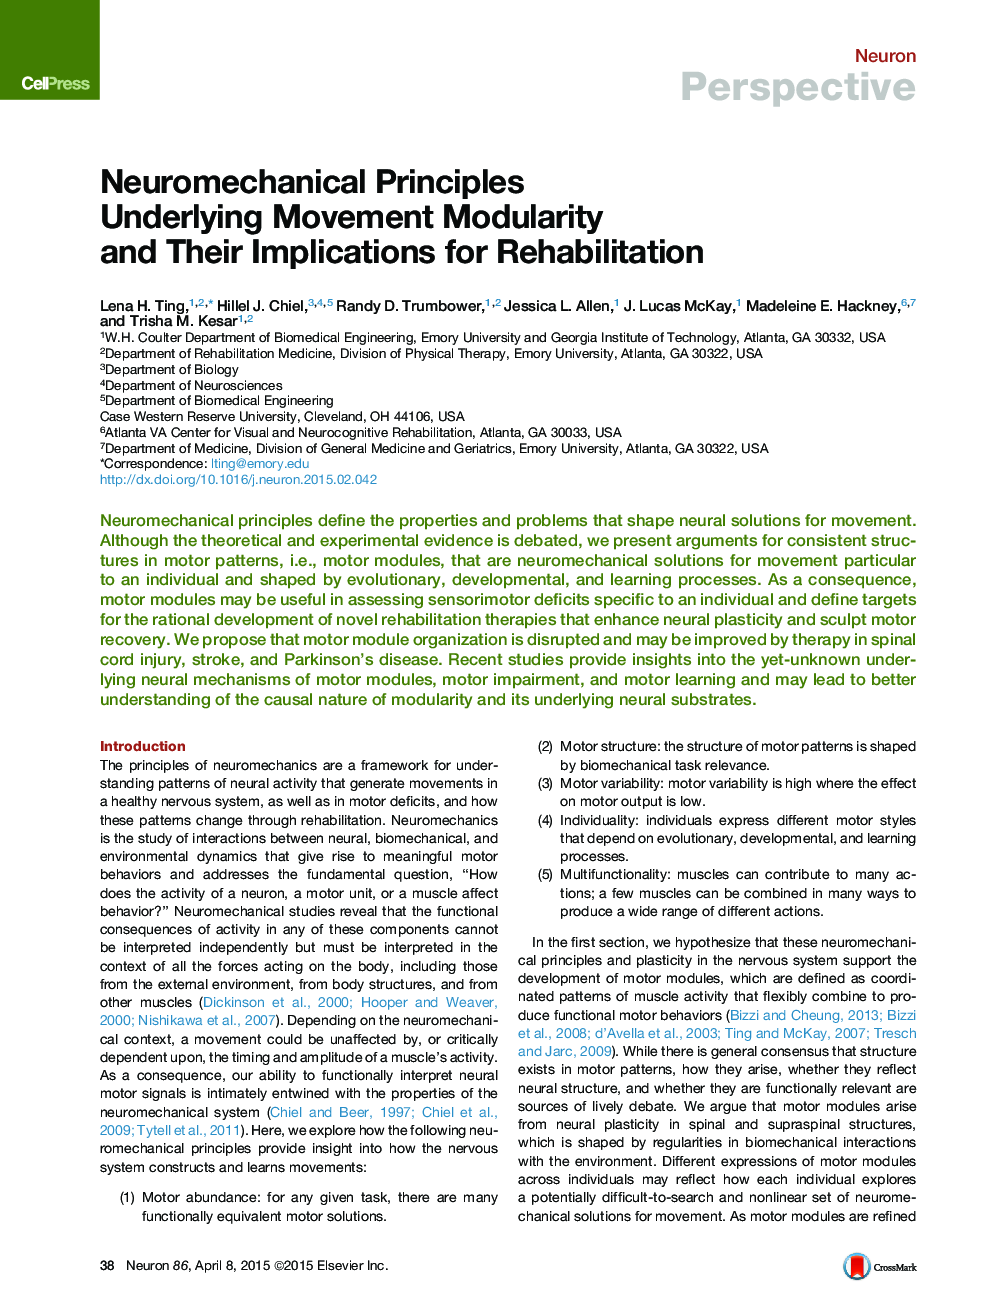 Neuromechanical Principles Underlying Movement Modularity and Their Implications for Rehabilitation